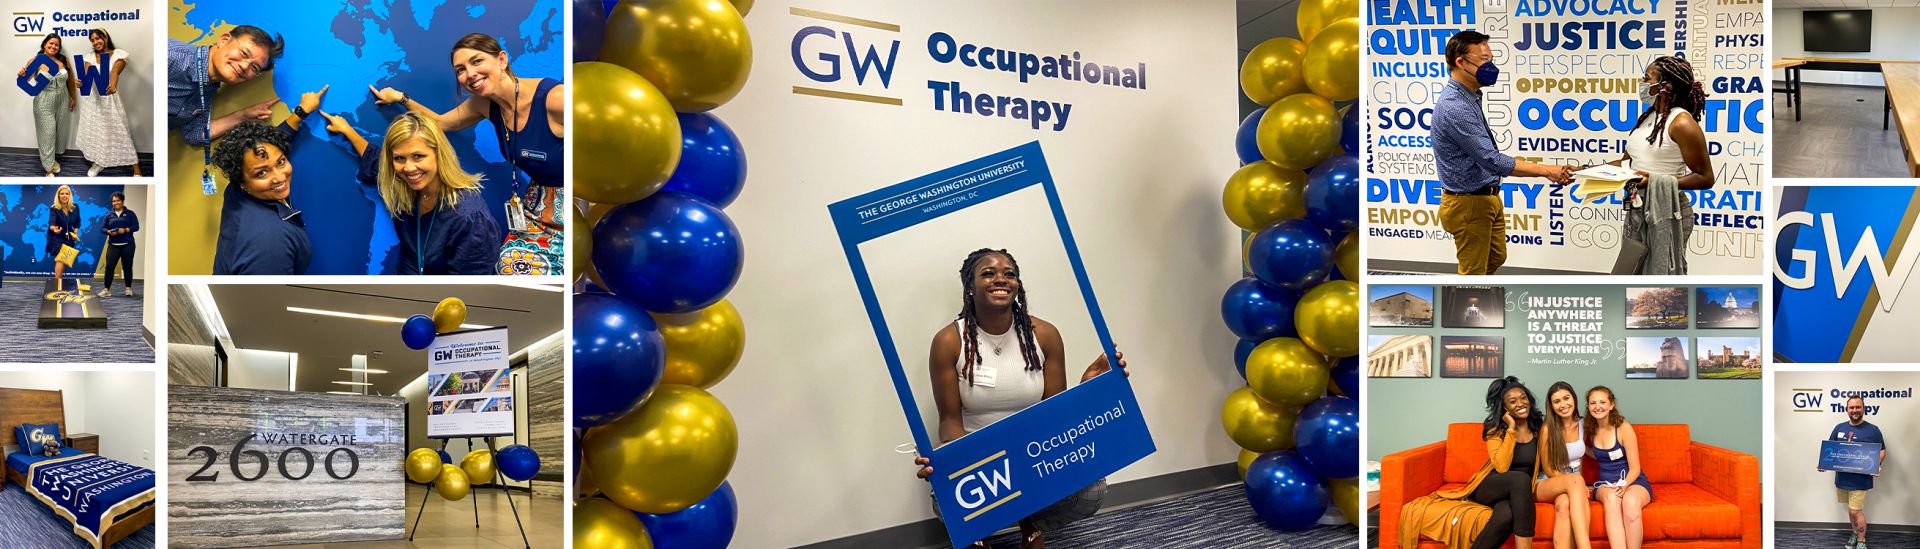 GW Occupational Therapy Facility